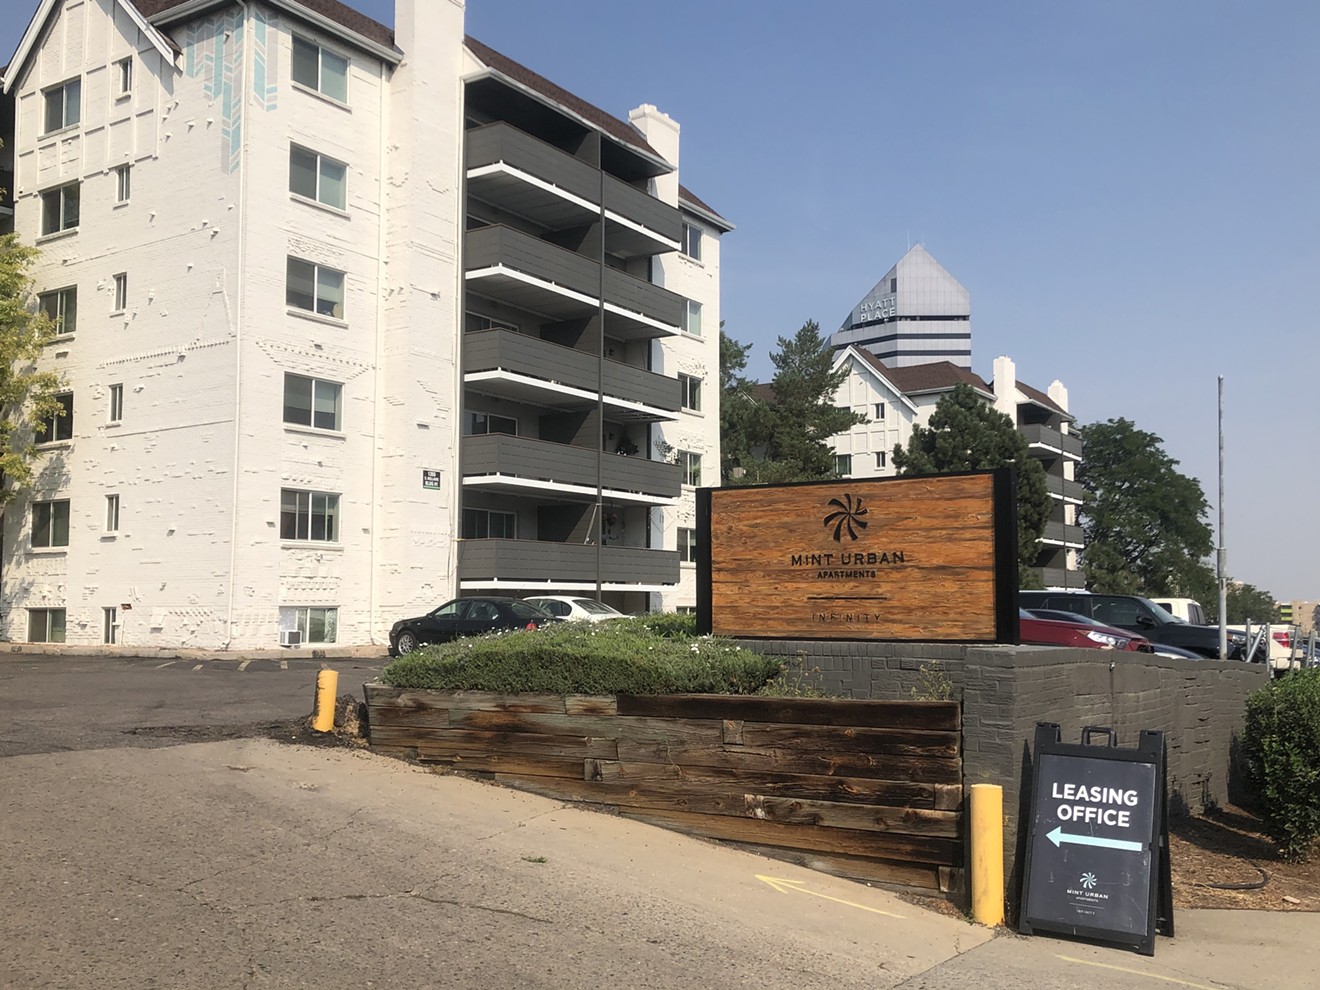 Tenants at the Mint Urban Infinity apartment complex on 1261 South Bellaire Street are exploring legal options.